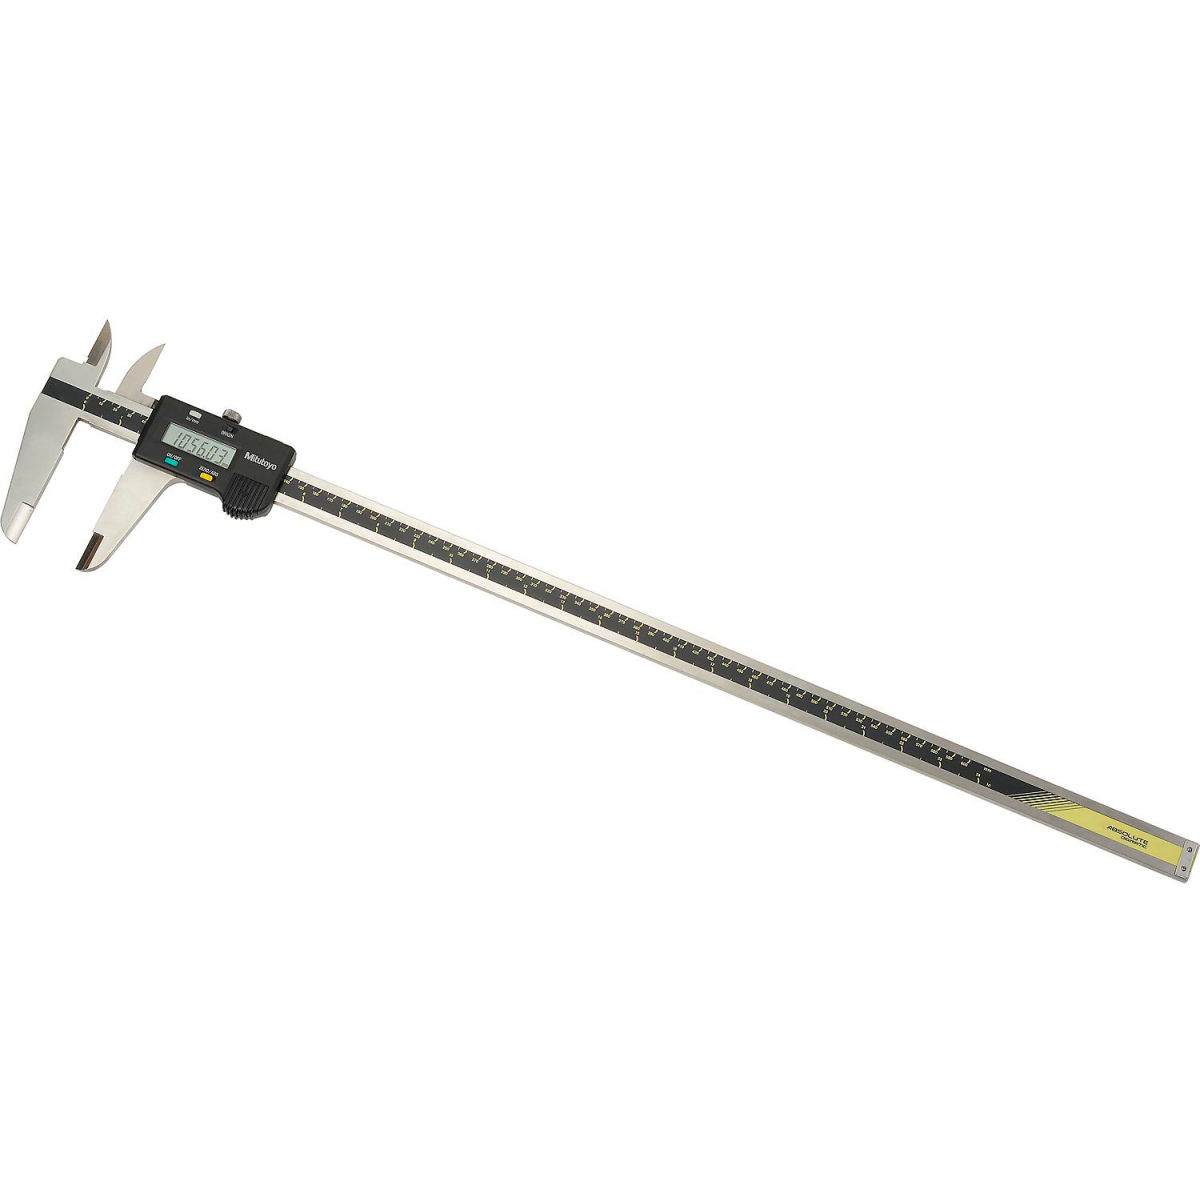 Homestead 500-506-10 Digimatic 0-24 in. & 600 mm Stainless Steel Digital Caliper with Data Output